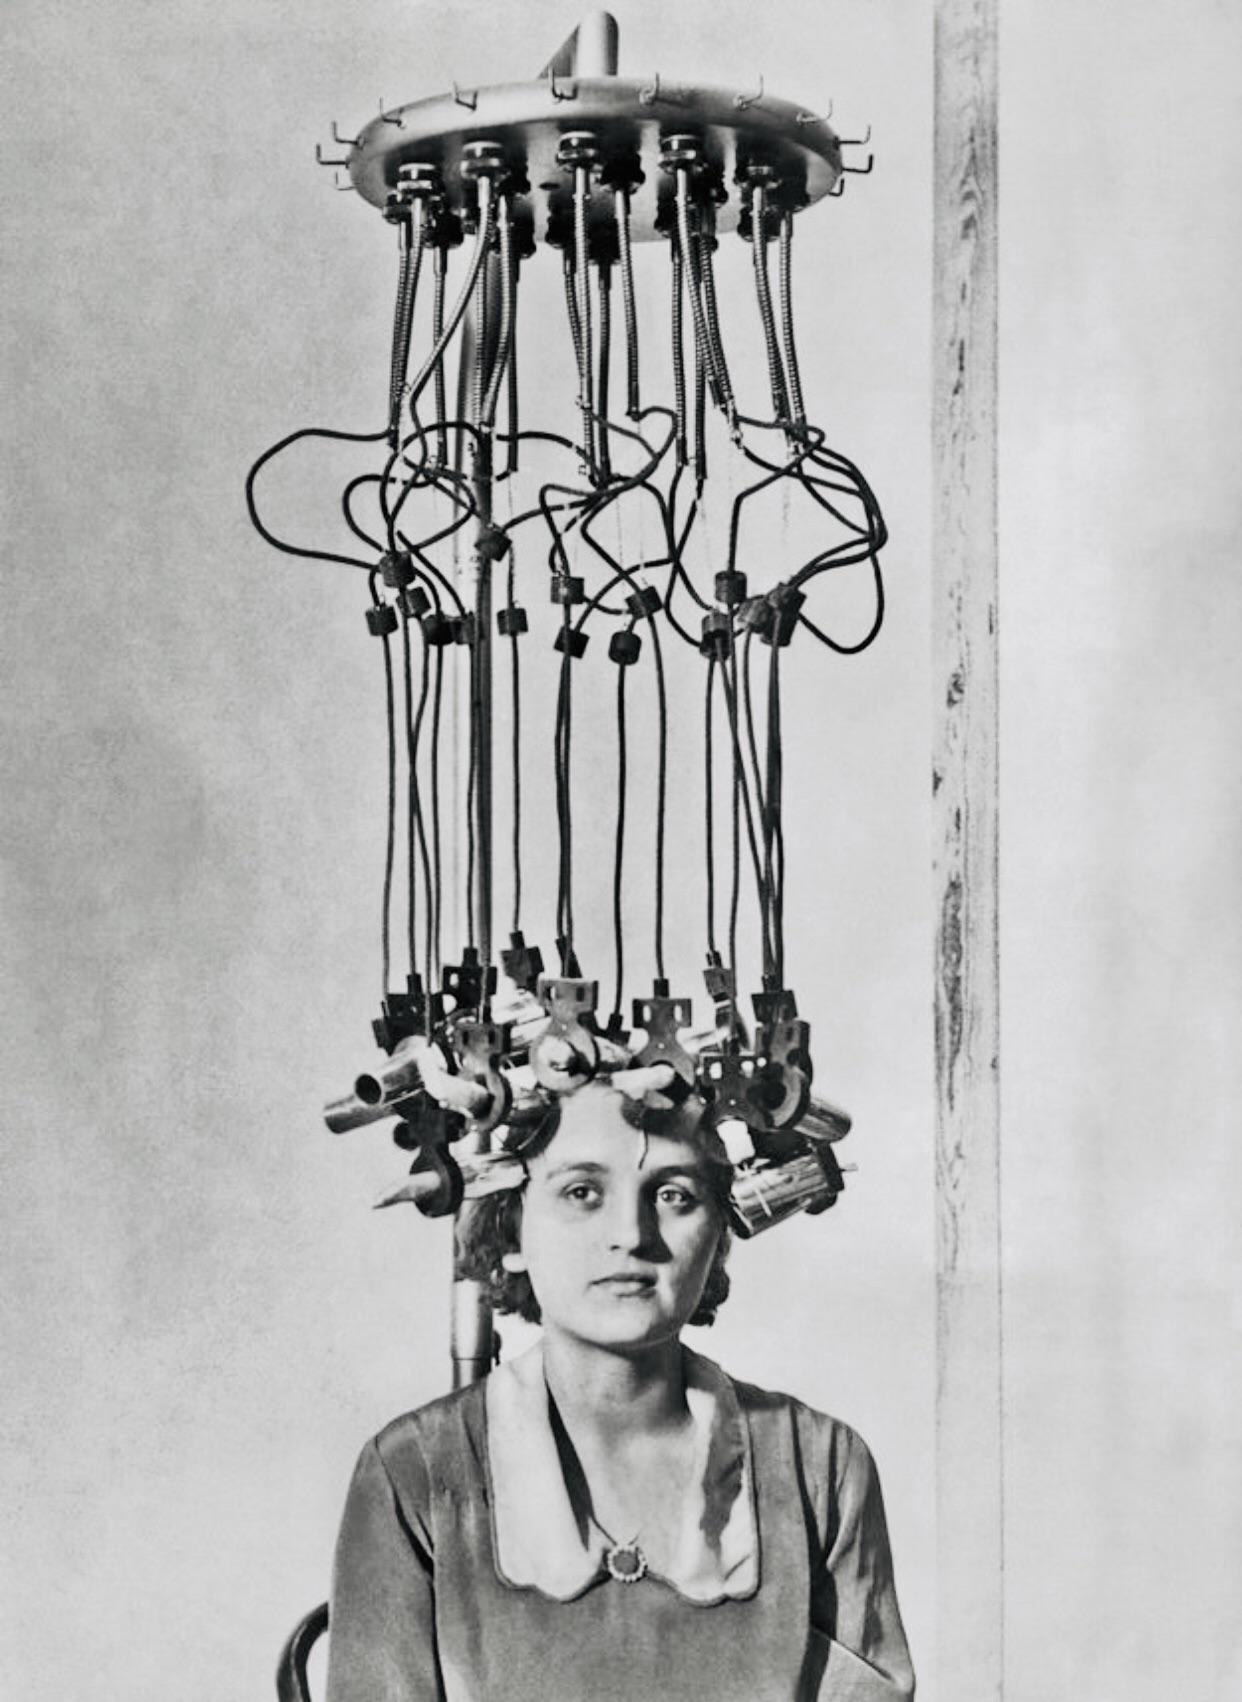 Women sat under a permanent hair waves machine for about 10 hours to achieve wavy hair. Often, the machine would malfunction.jpg